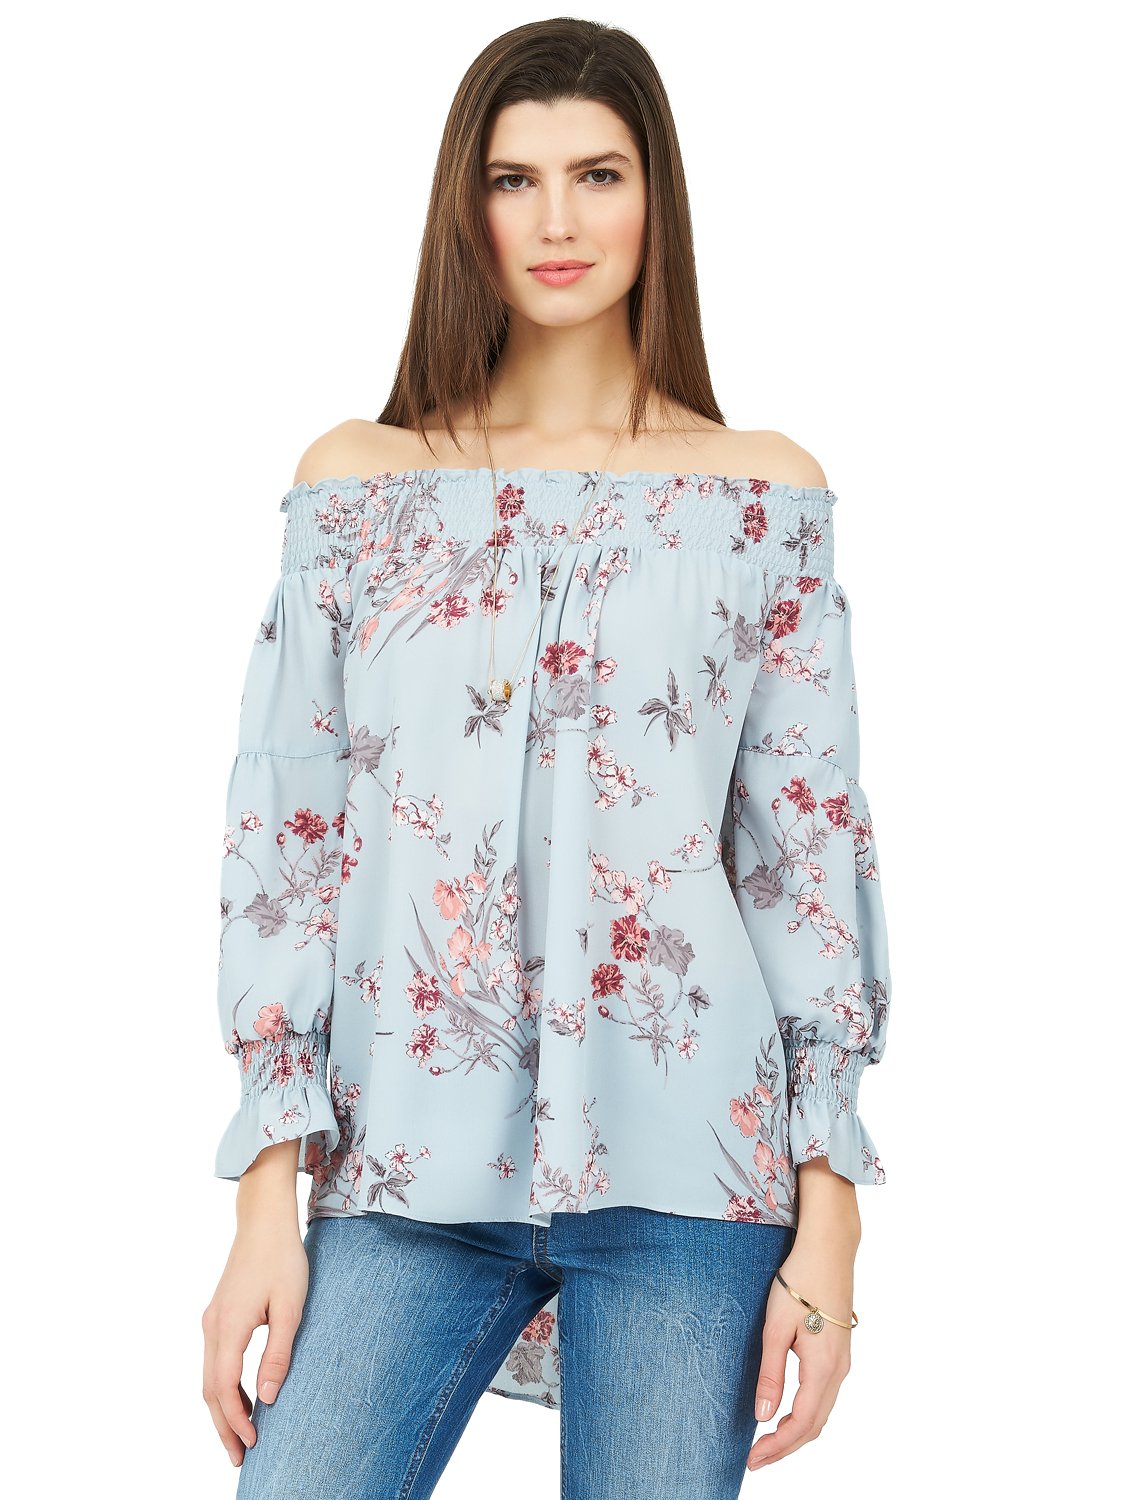 Printed Chiffon Off-The-Shoulder Top